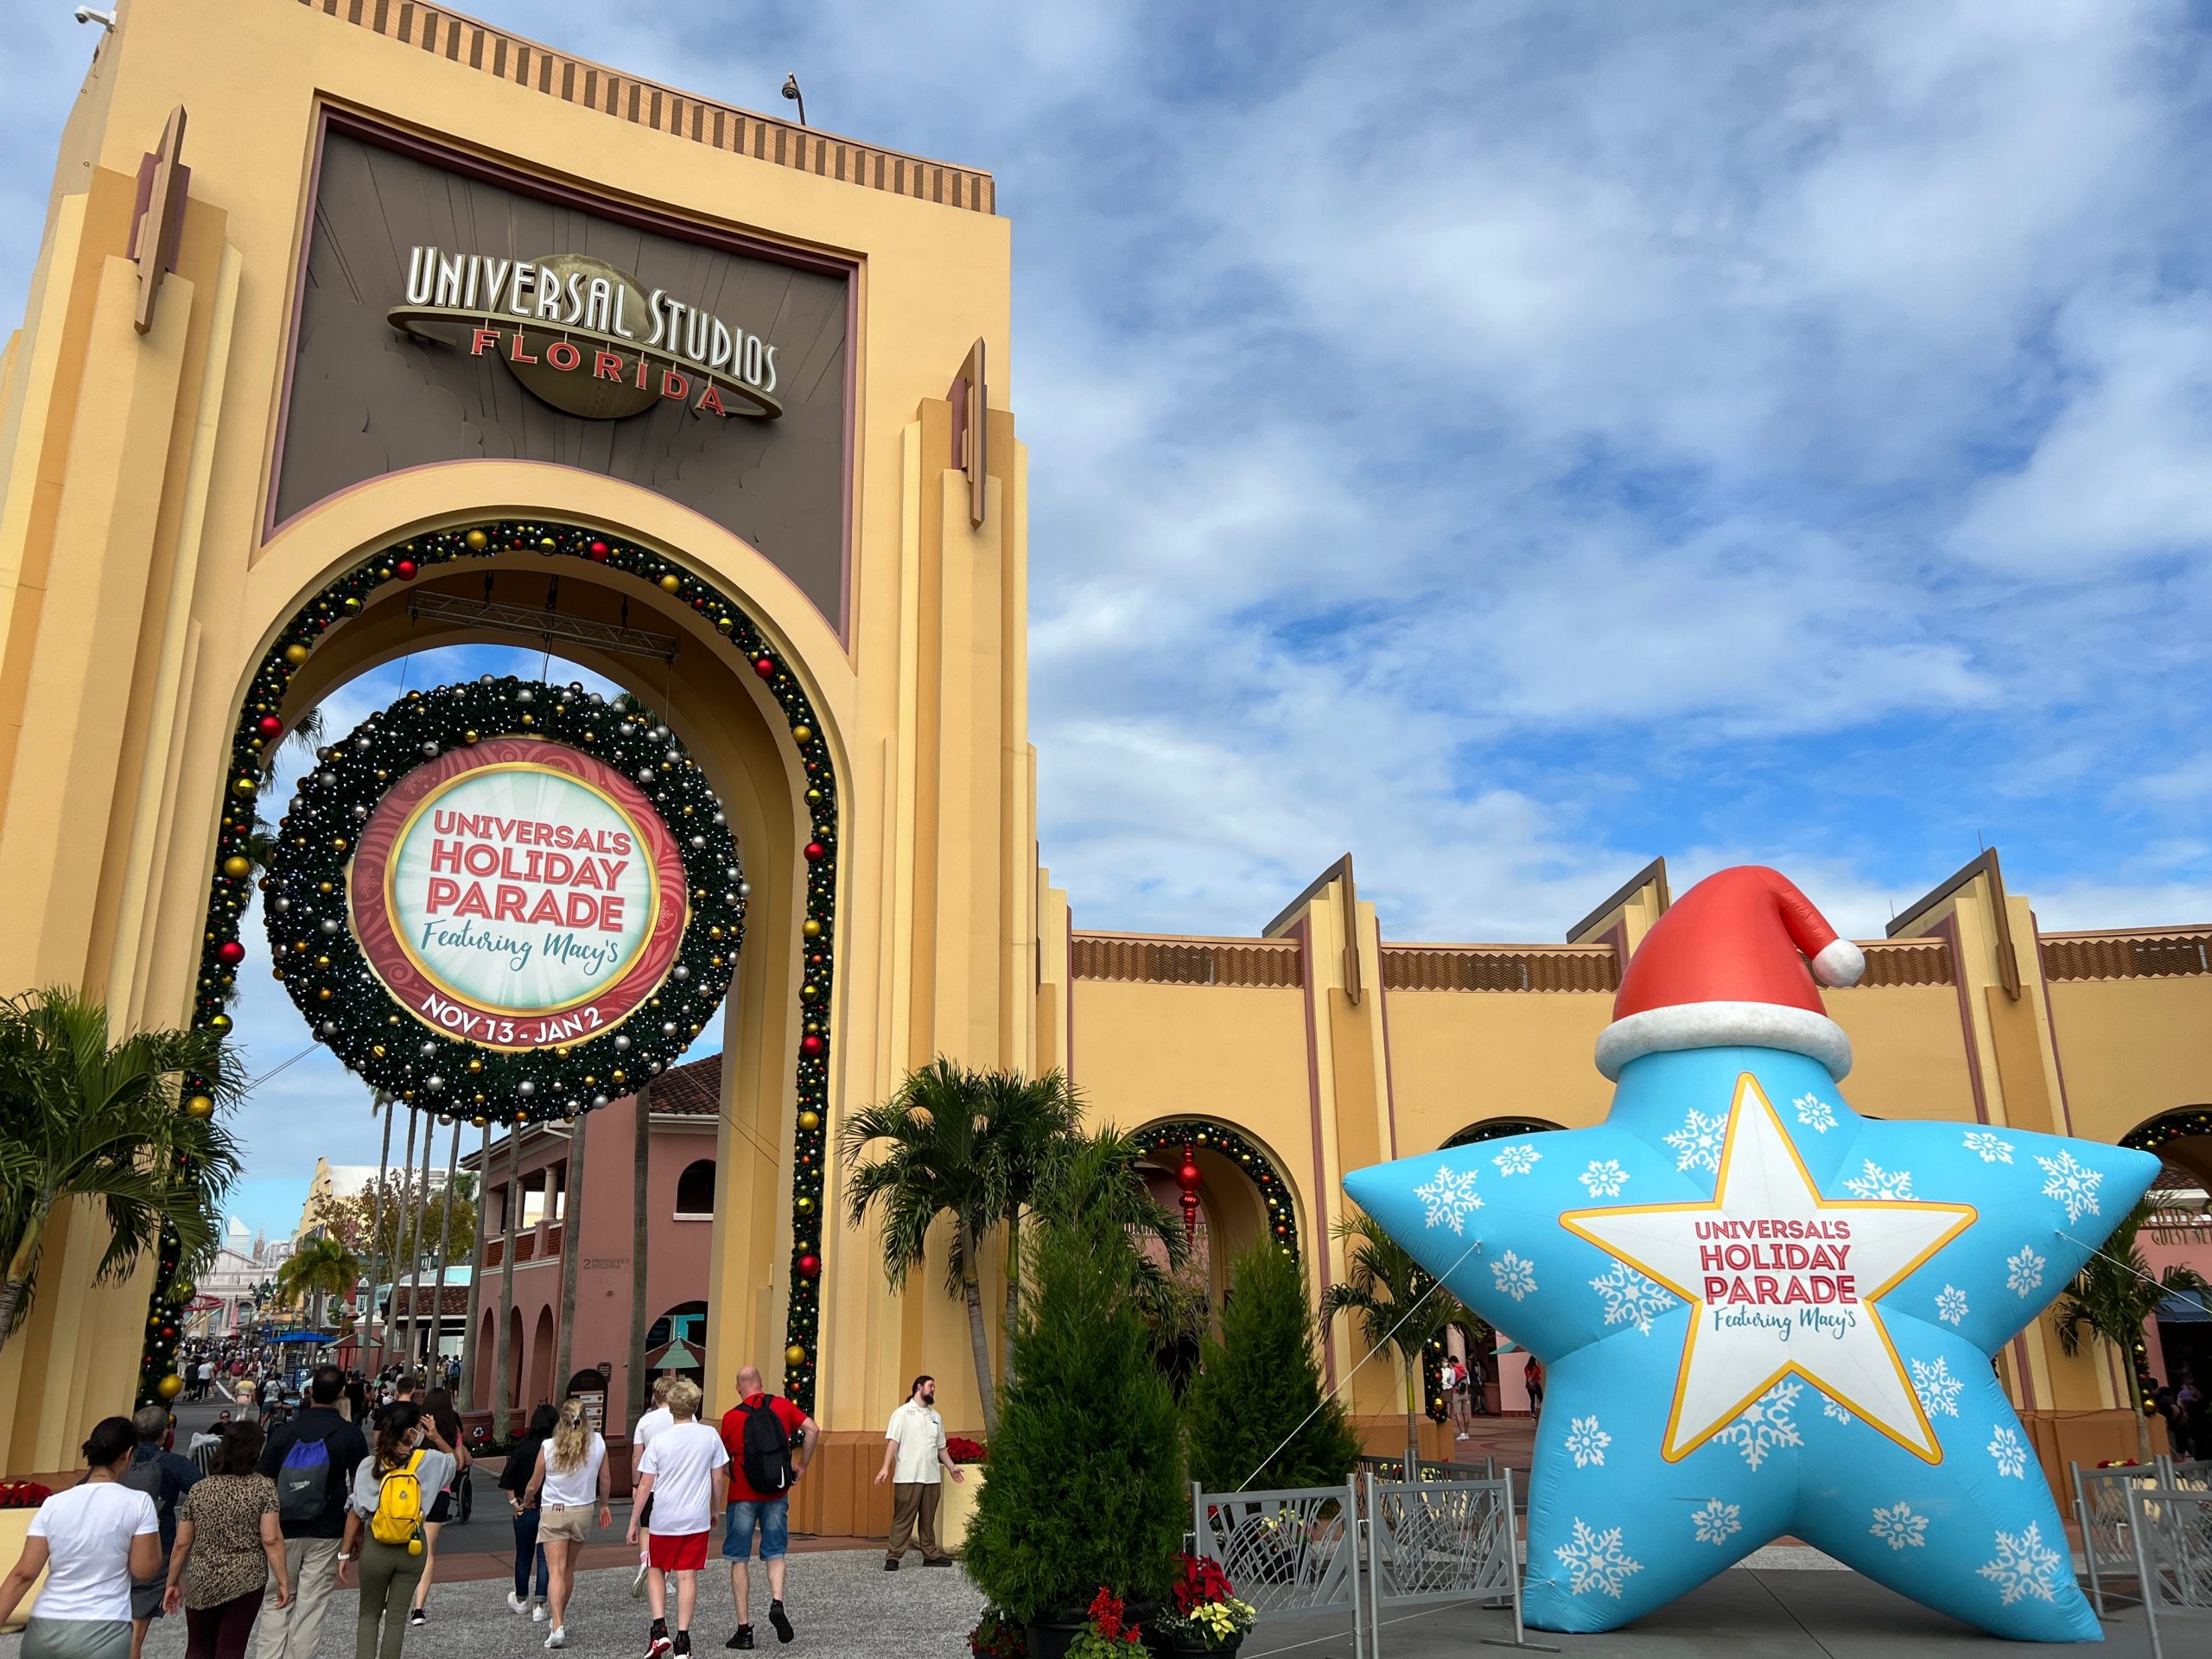 Some of Universal Orlando's holiday decorations, including an inflatable blue star with a Santa hat.